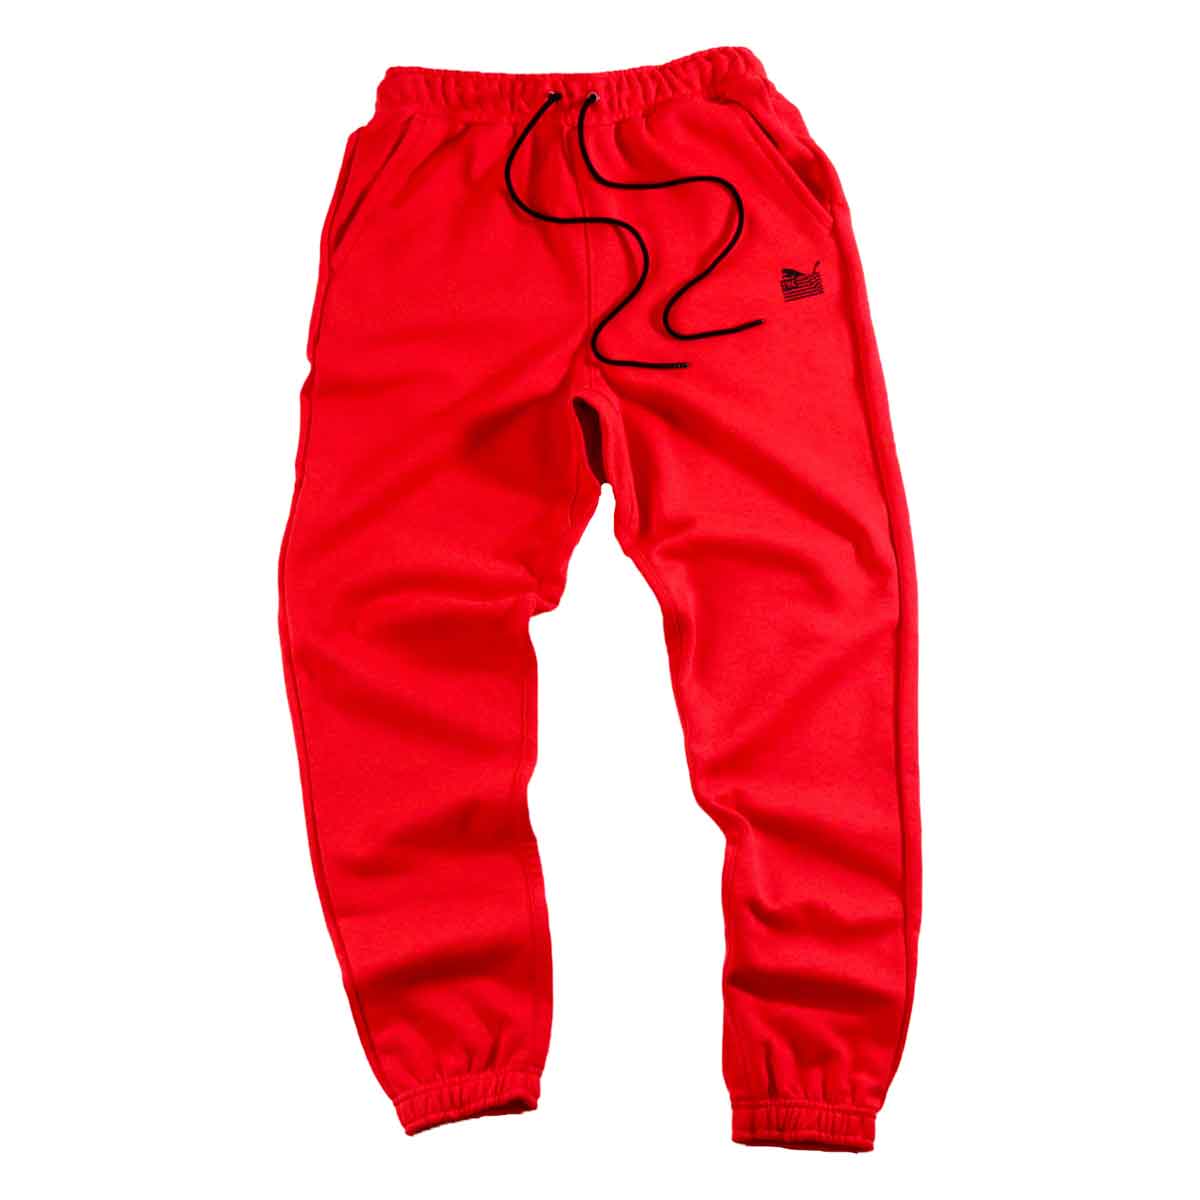 PUMA x TMC Everyday Hussle Collection Sweatpants - Red